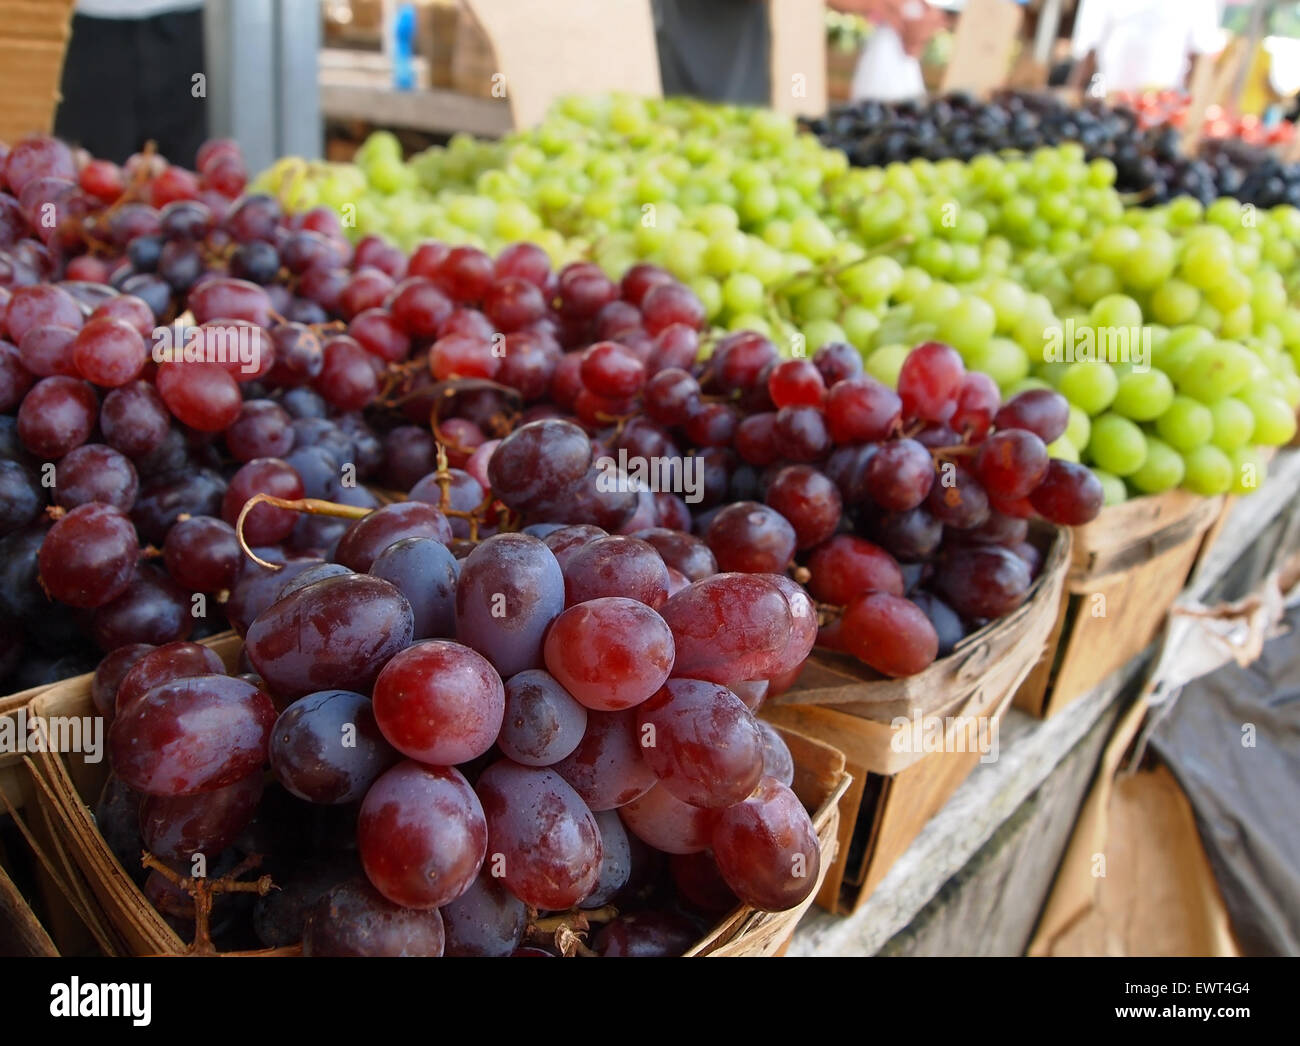 Red and green local grapes for sale a roadside country farmer's market. Stock Photo